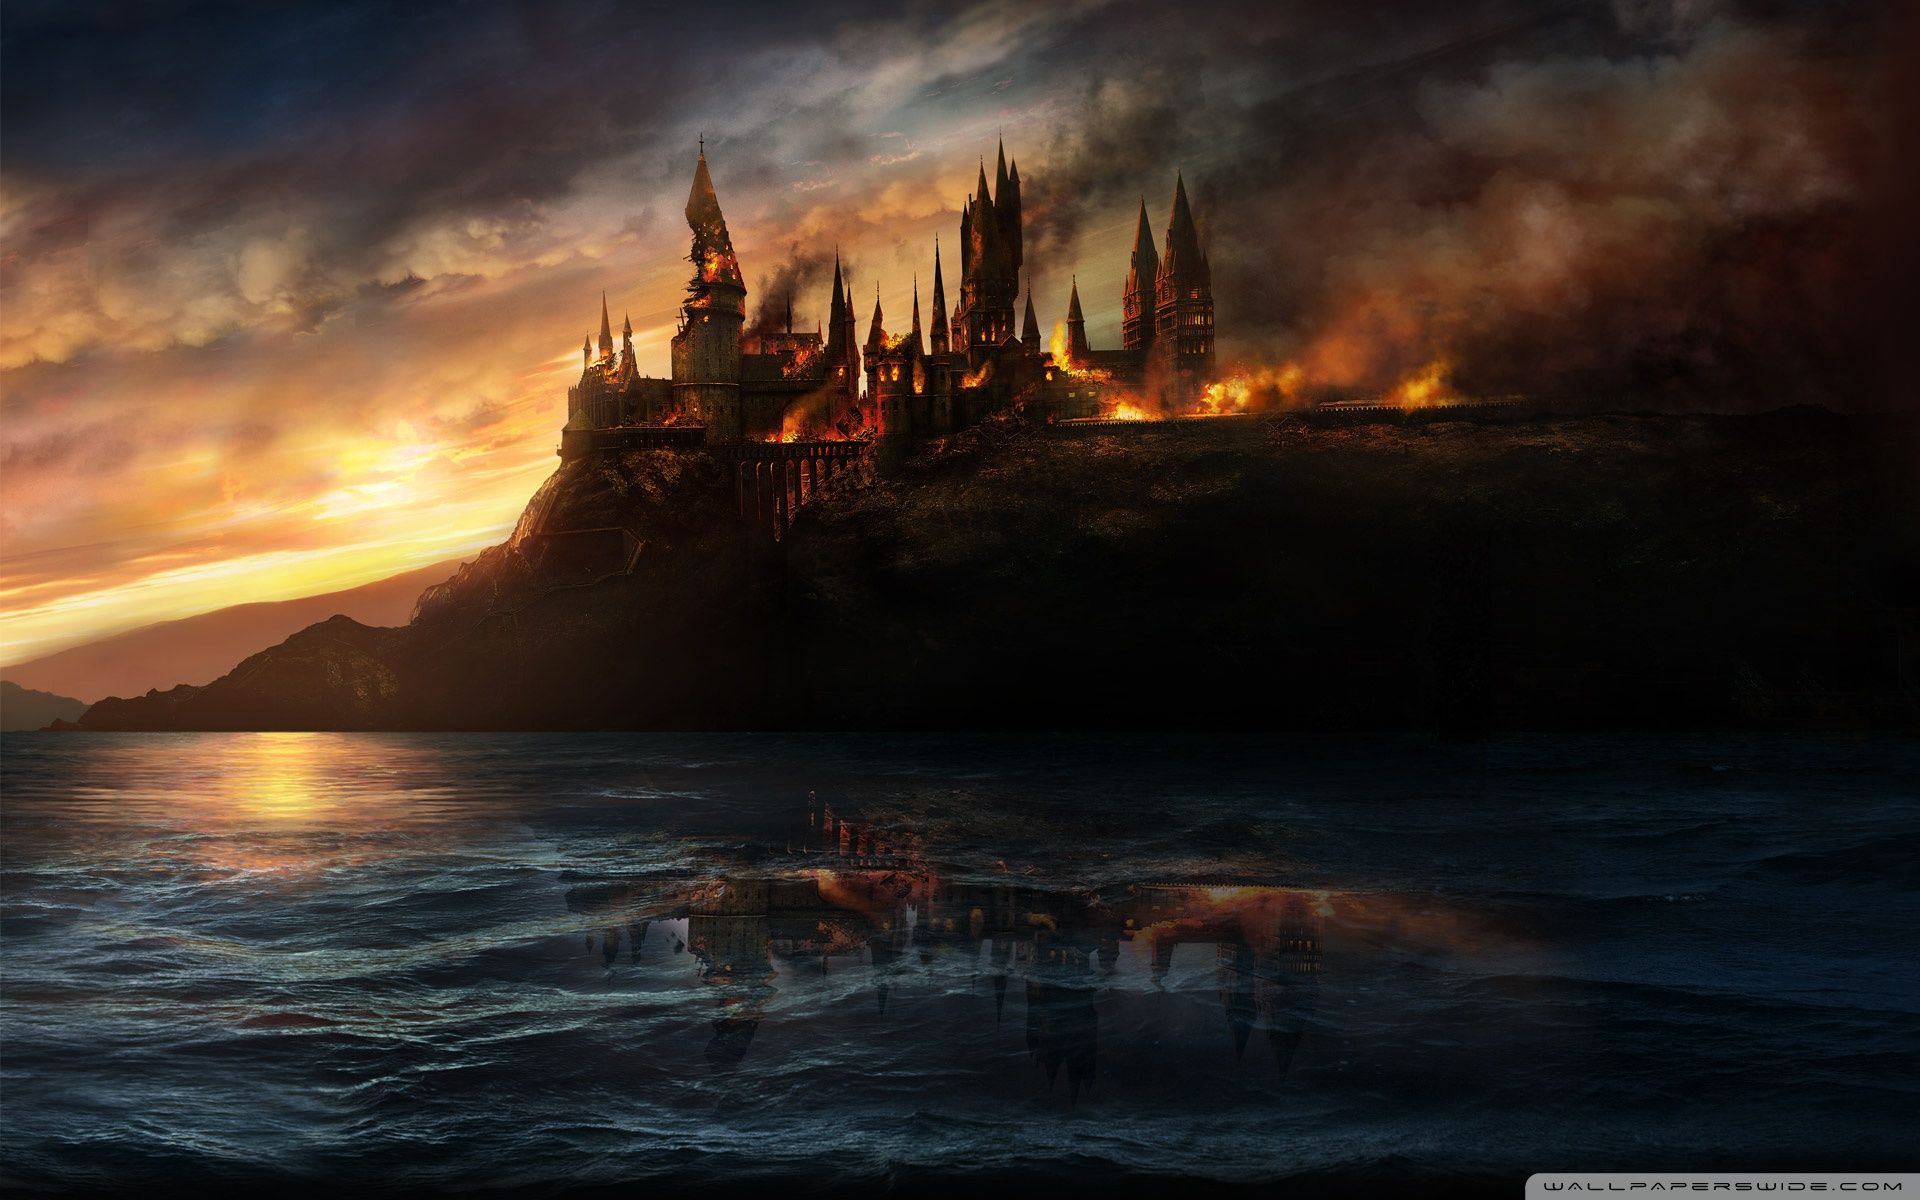 The Hogwarts castle is burning on the hill above the sea - Harry Potter